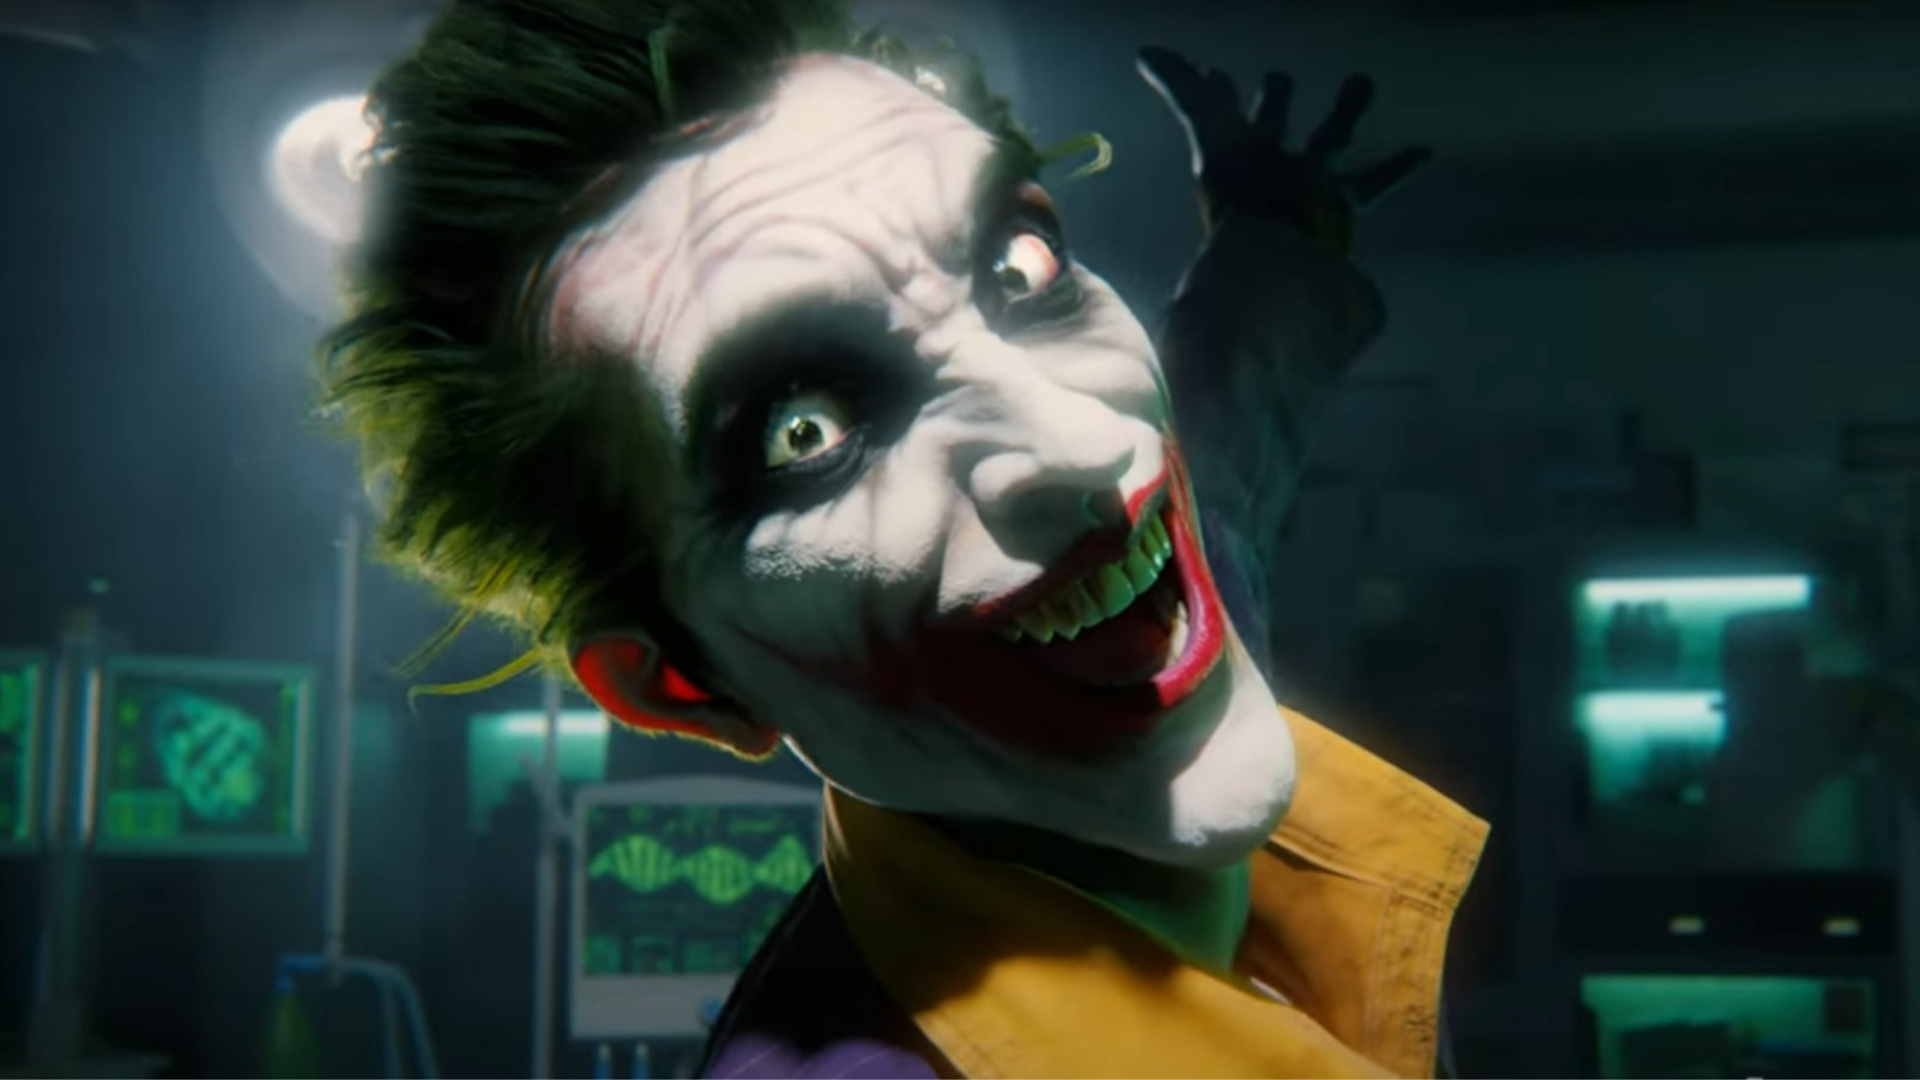 State Of Survival Welcomes The Joker Later This Year thumbnail